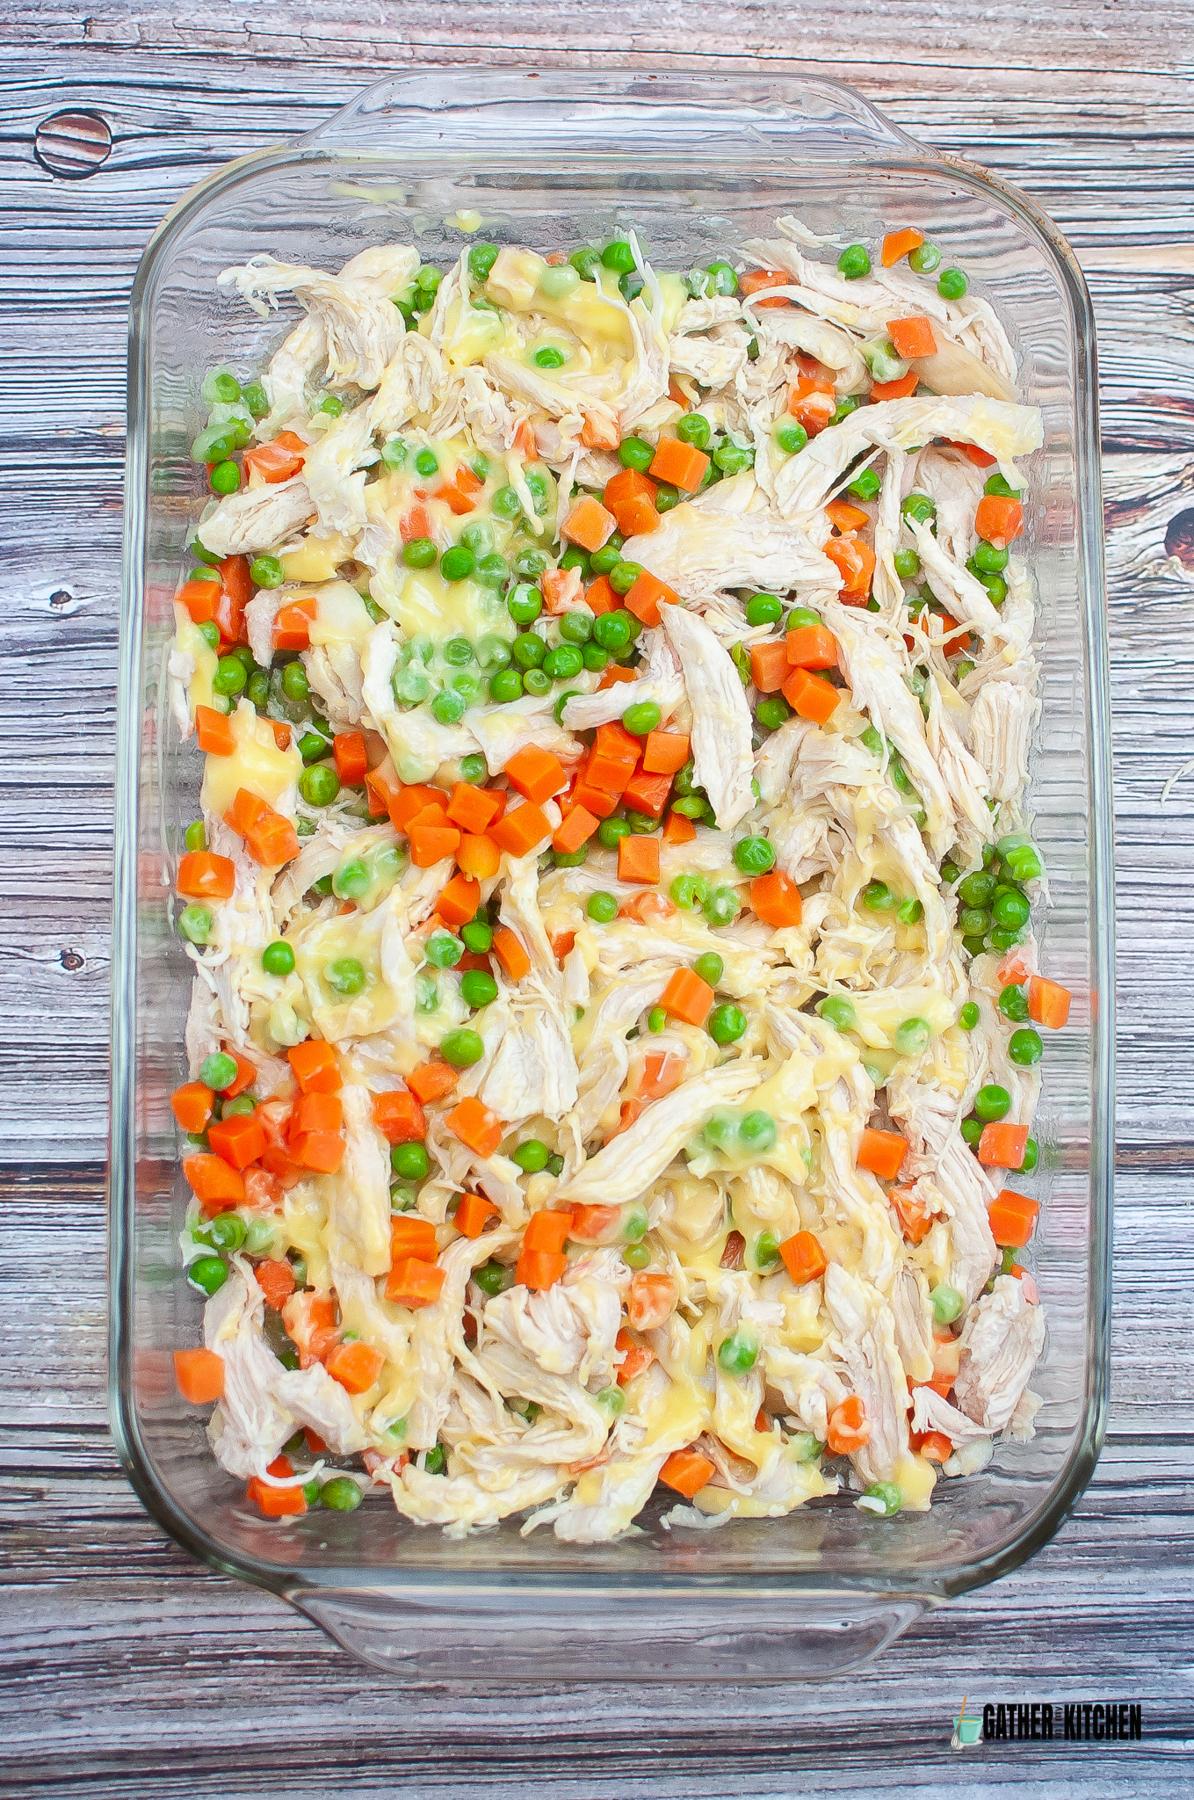 Casserole dish with the veggies, chicken, and cream of chicken soup in it.